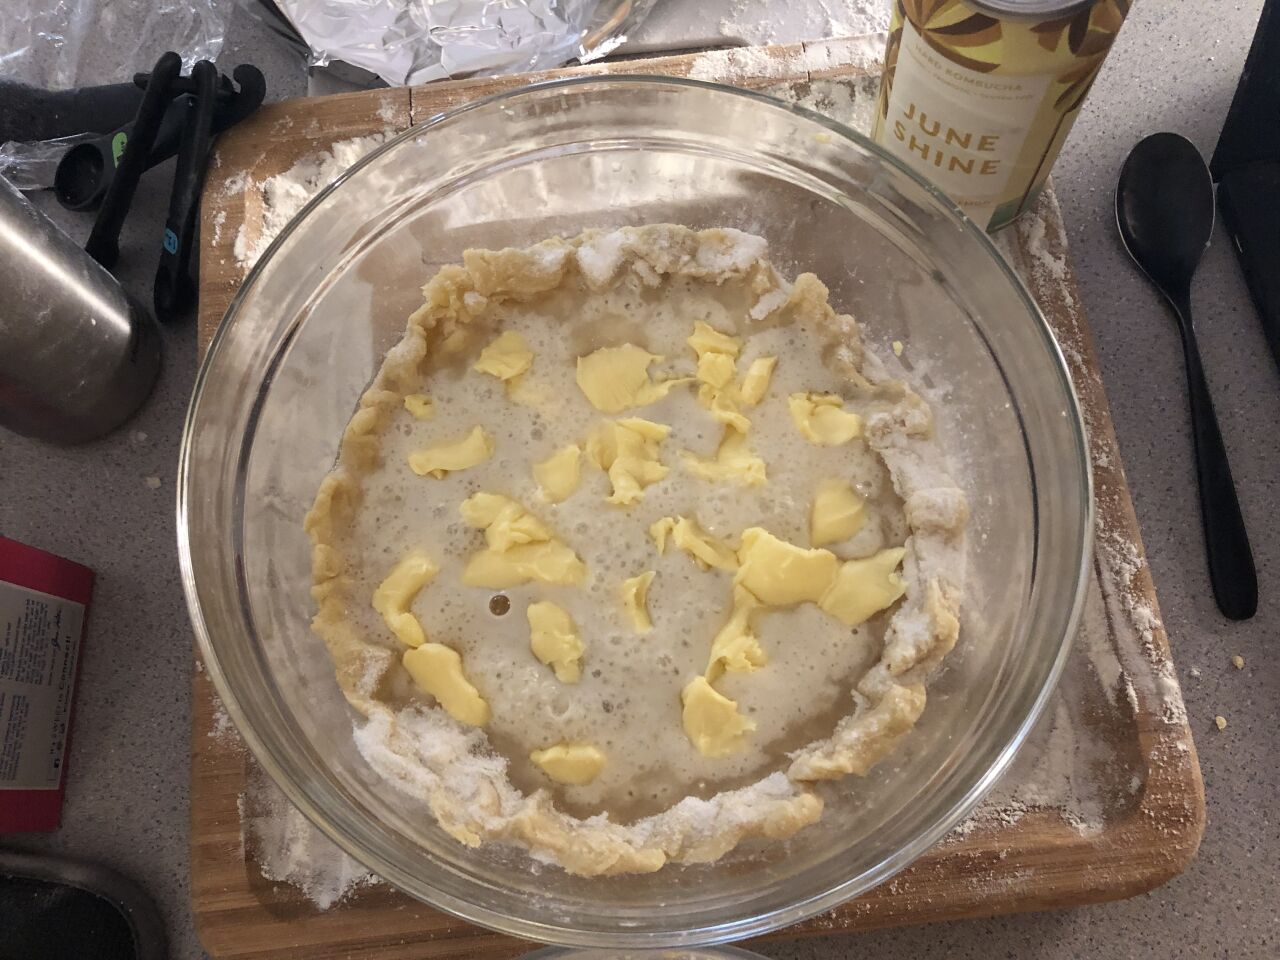 The pie sprinkled with pieces of grated butter. Admittedly, the butter is more mushed than grated, since I accidentally left the butter out after making the pie crust.